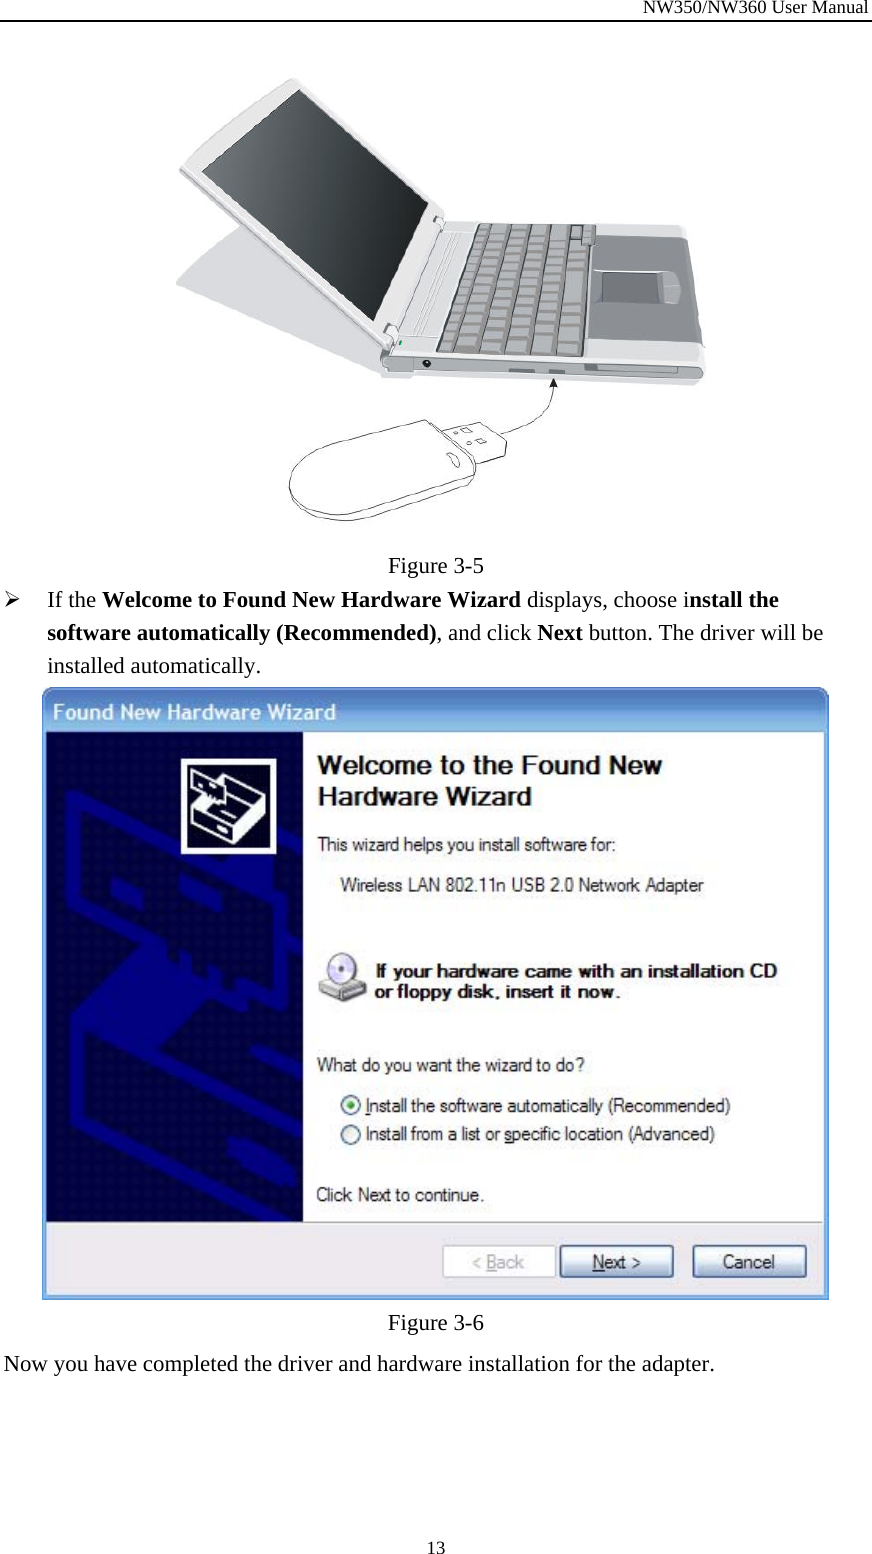 NW350/NW360 User Manual  13 Figure  3-5 ¾ If the Welcome to Found New Hardware Wizard displays, choose install the software automatically (Recommended), and click Next button. The driver will be installed automatically.  Figure  3-6 Now you have completed the driver and hardware installation for the adapter. 